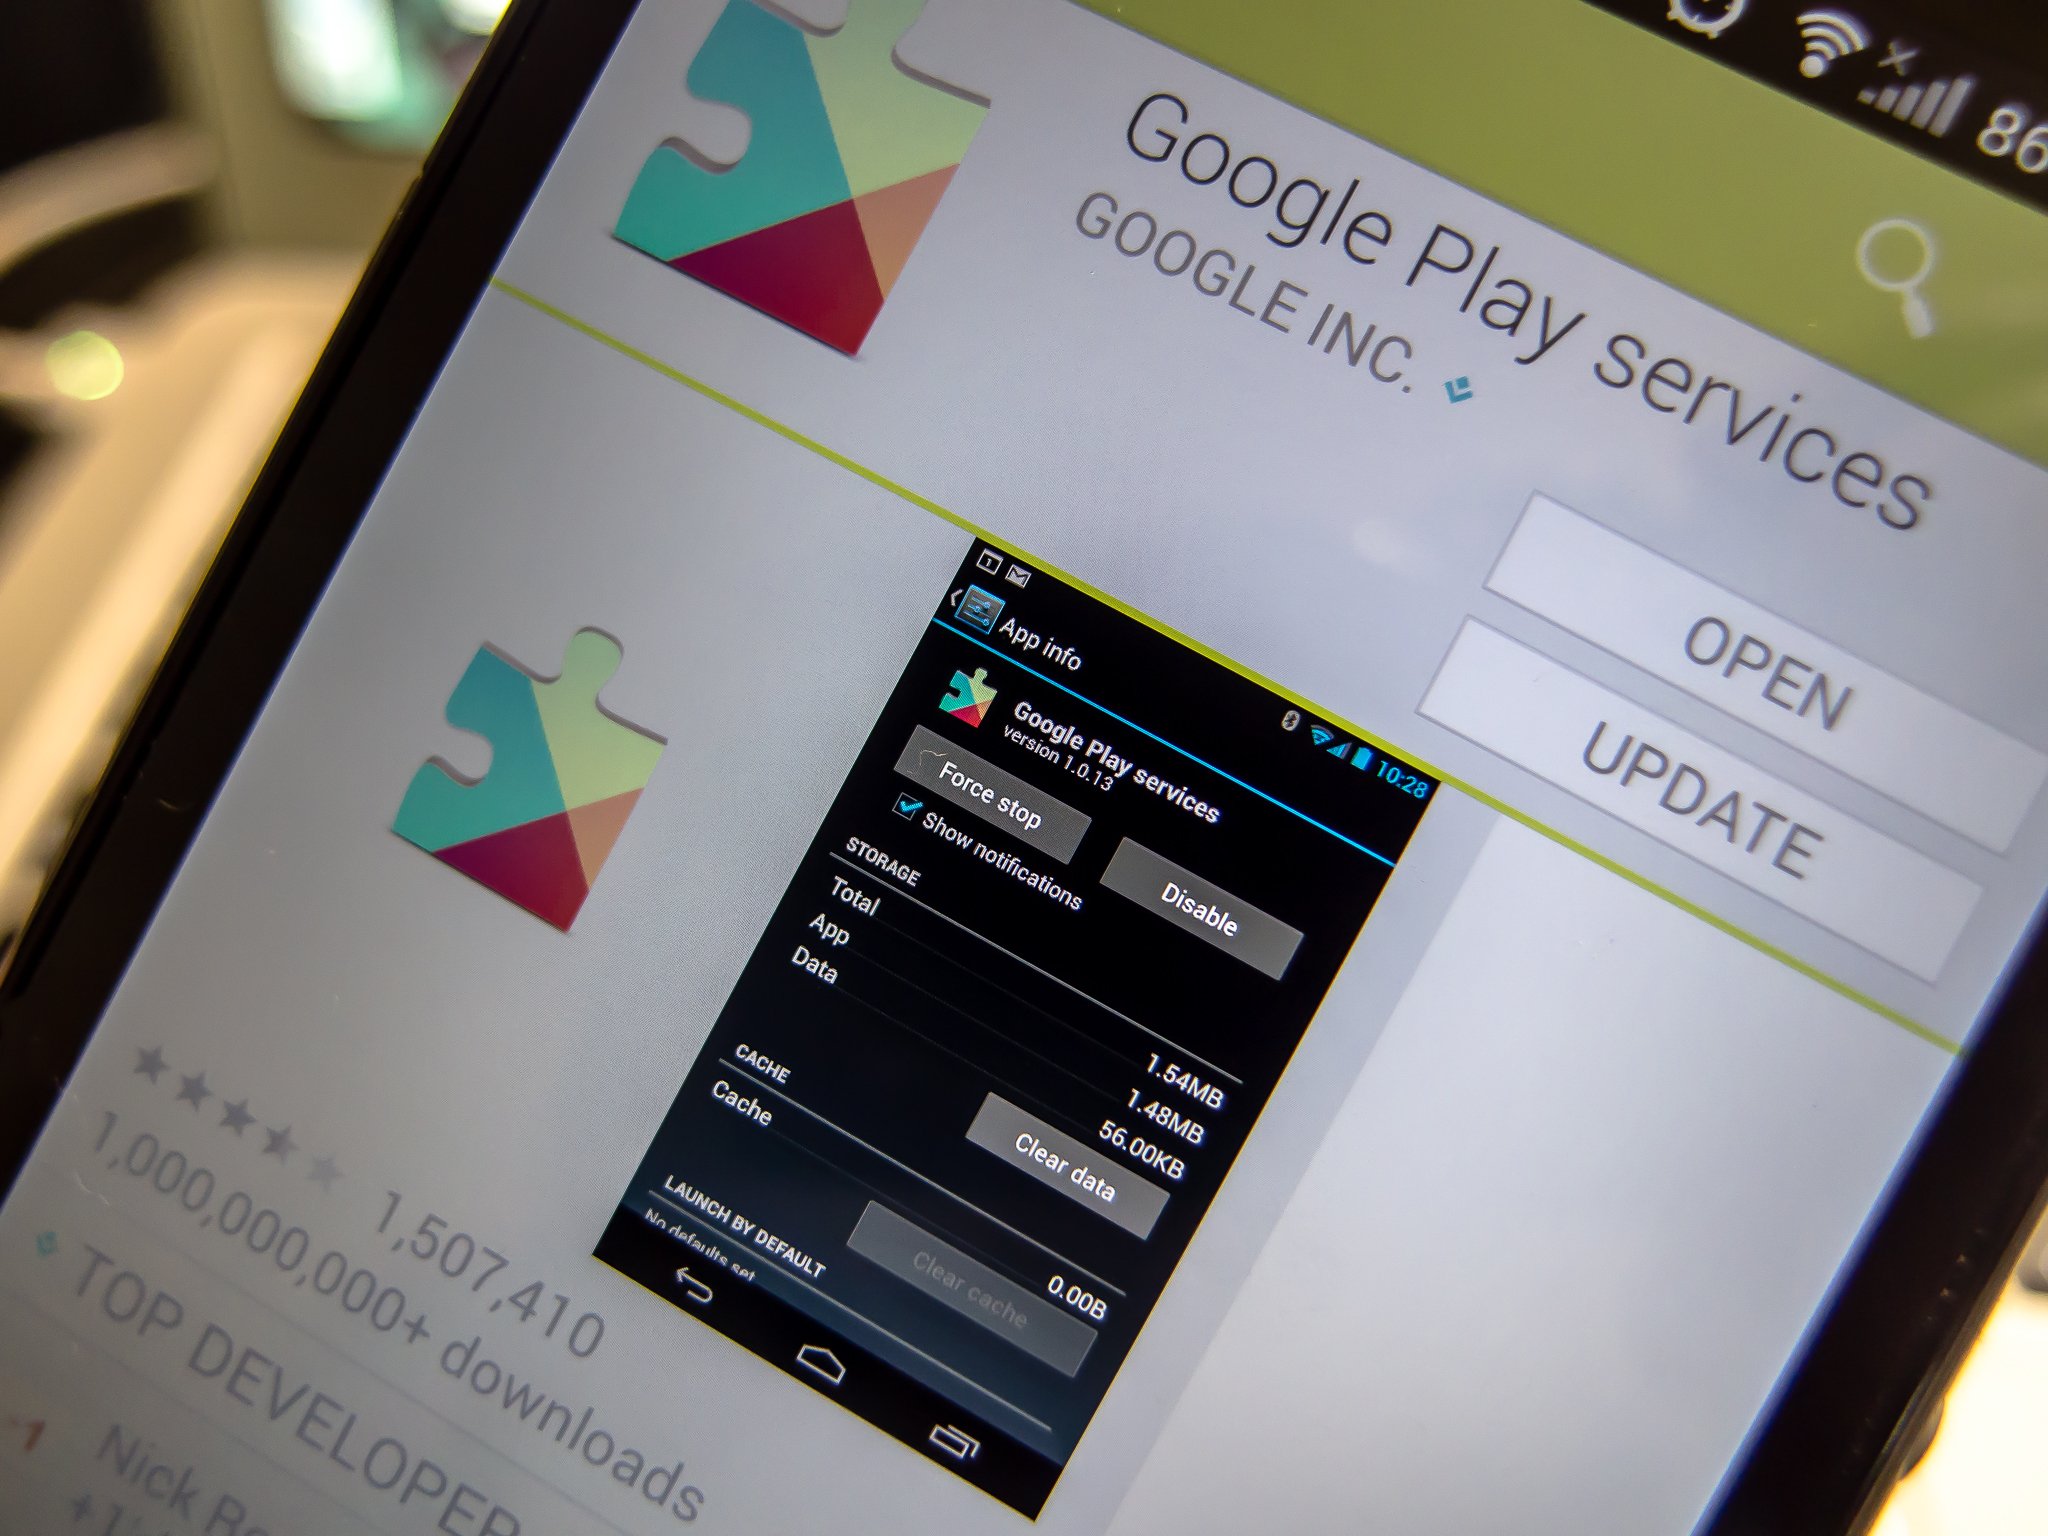 Google Play Services 4.4 can tell when you're walking or running